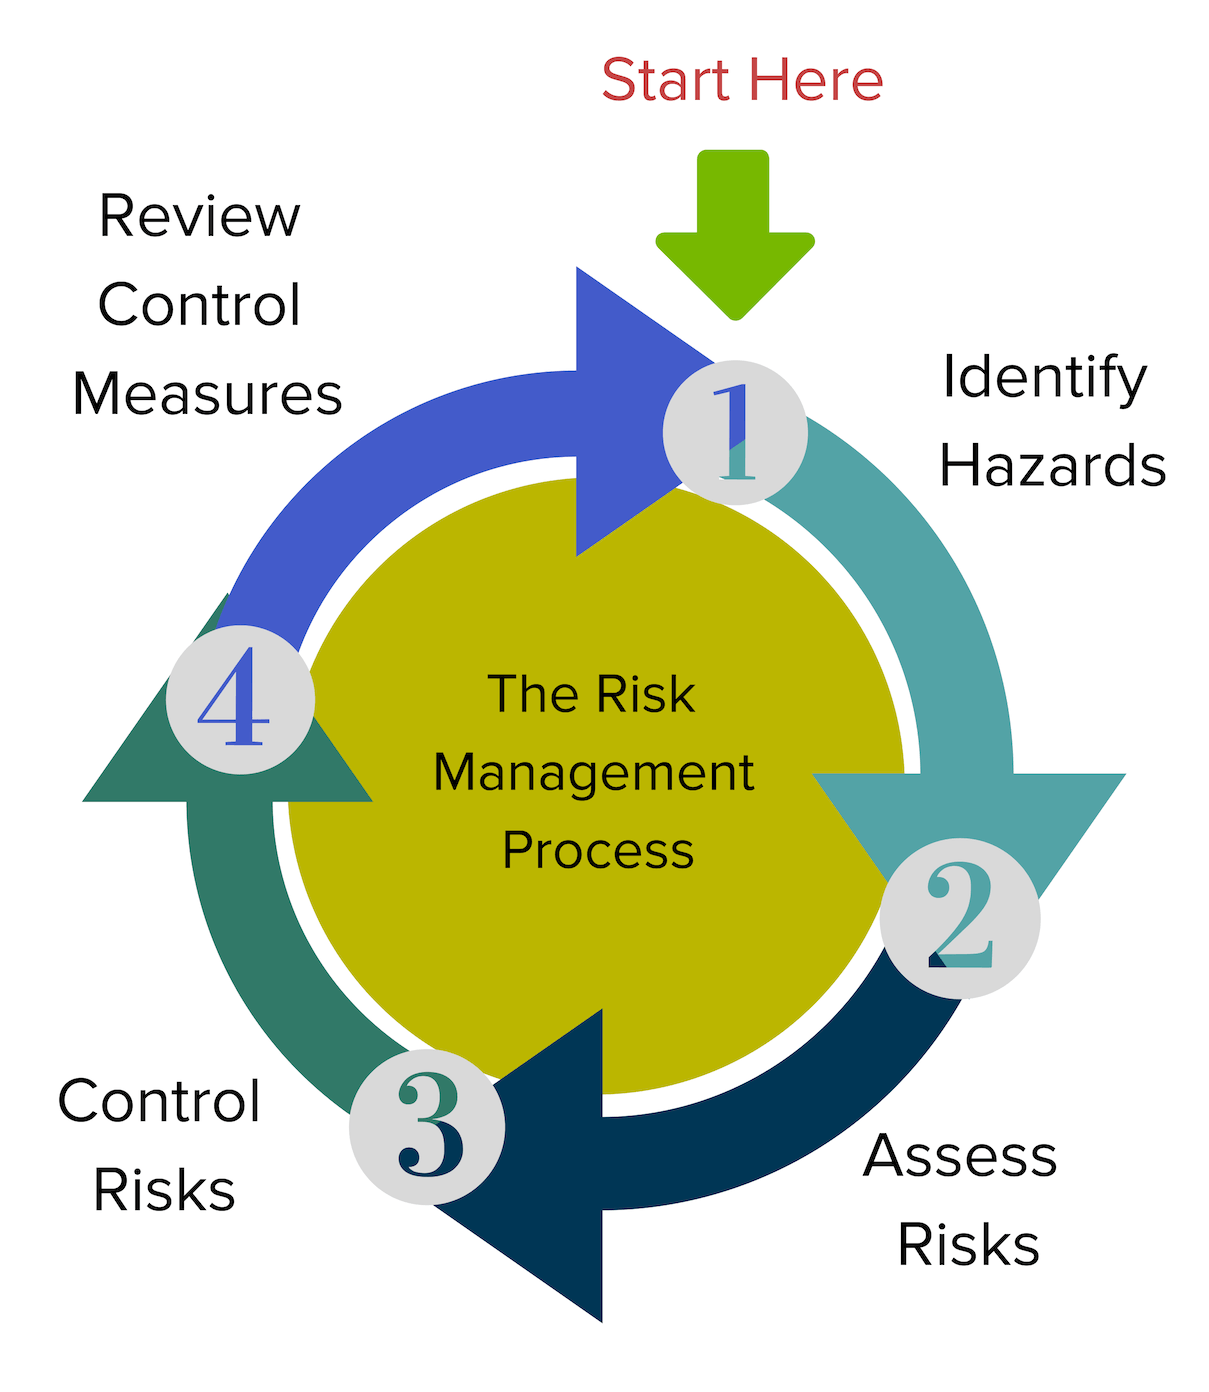 Diagram of the risk management process. You start with identifying hazards, then assessing risks, then controlling risks and finally reviewing control measures.